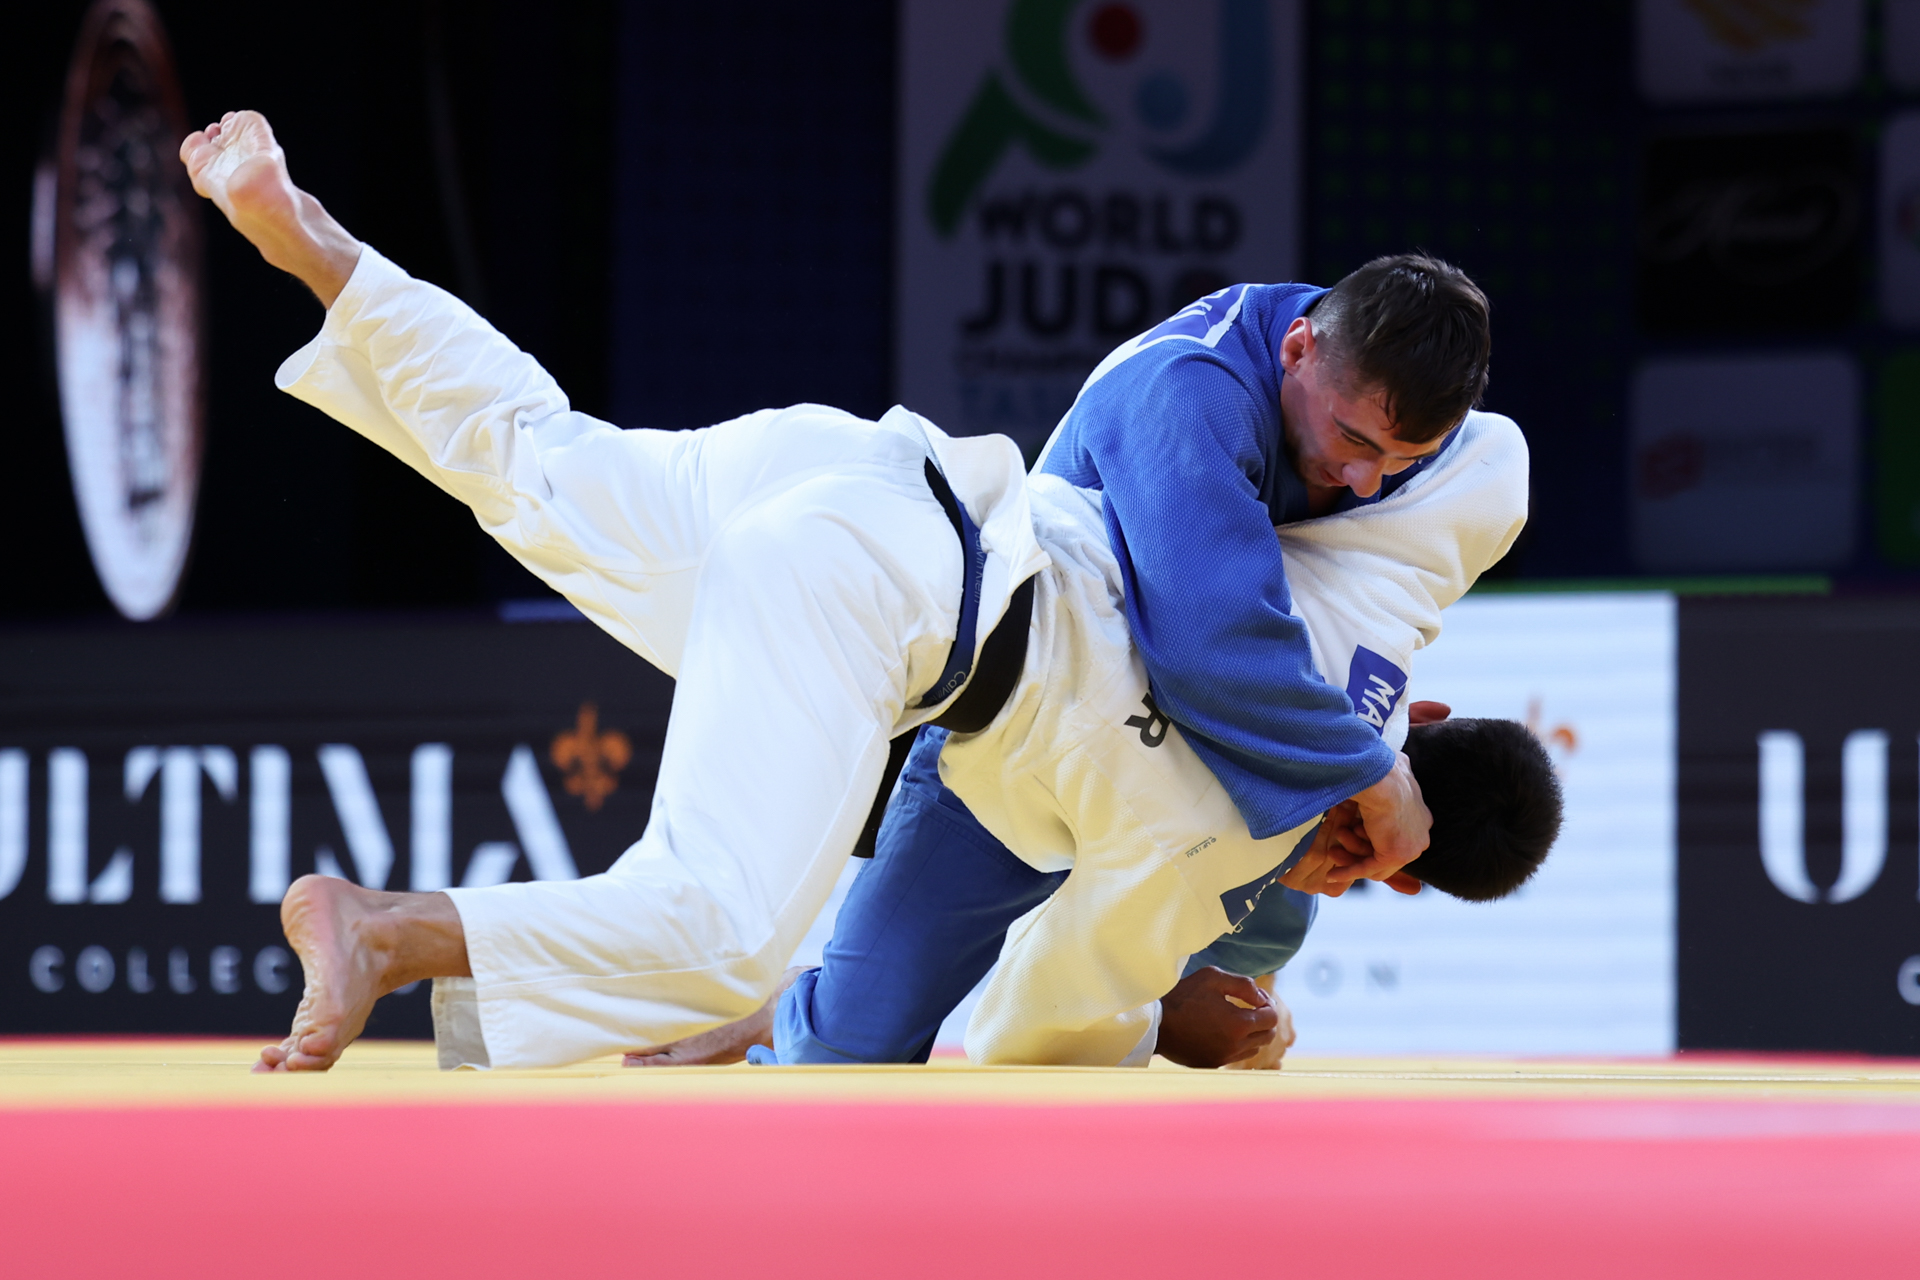 EUROPE TAKE HALF THE MEDAL HAUL ON DAY TWO IN TASHKENT